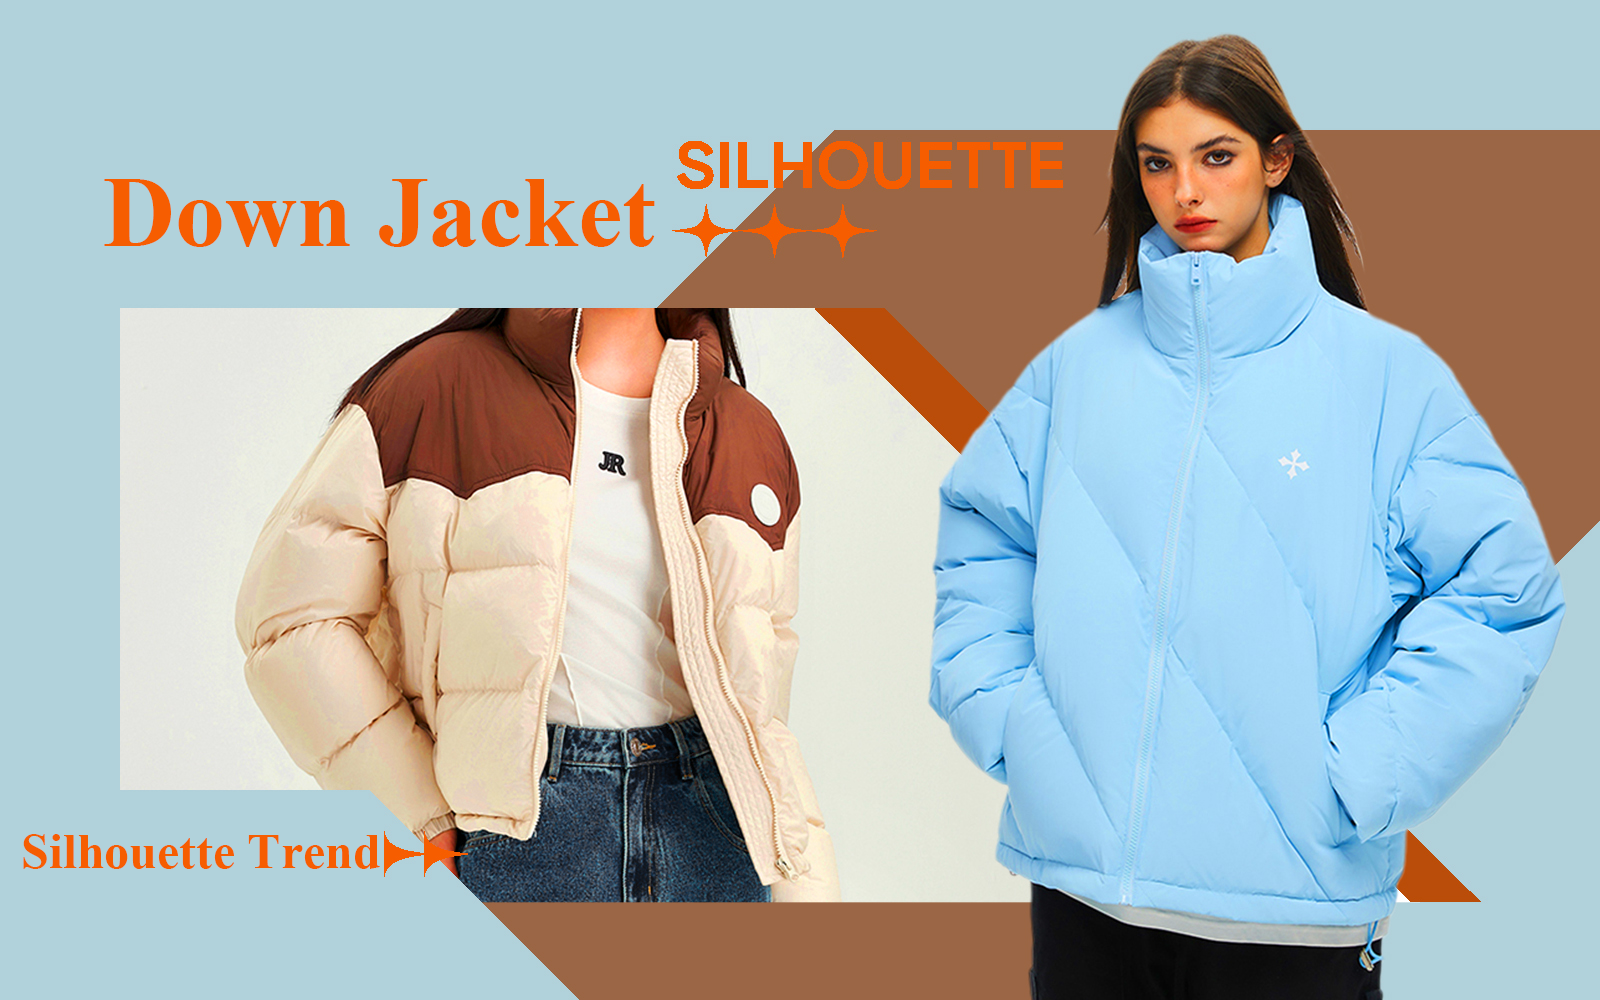 Warm Elegance -- The Silhouette Trend for Women's Down Jacket